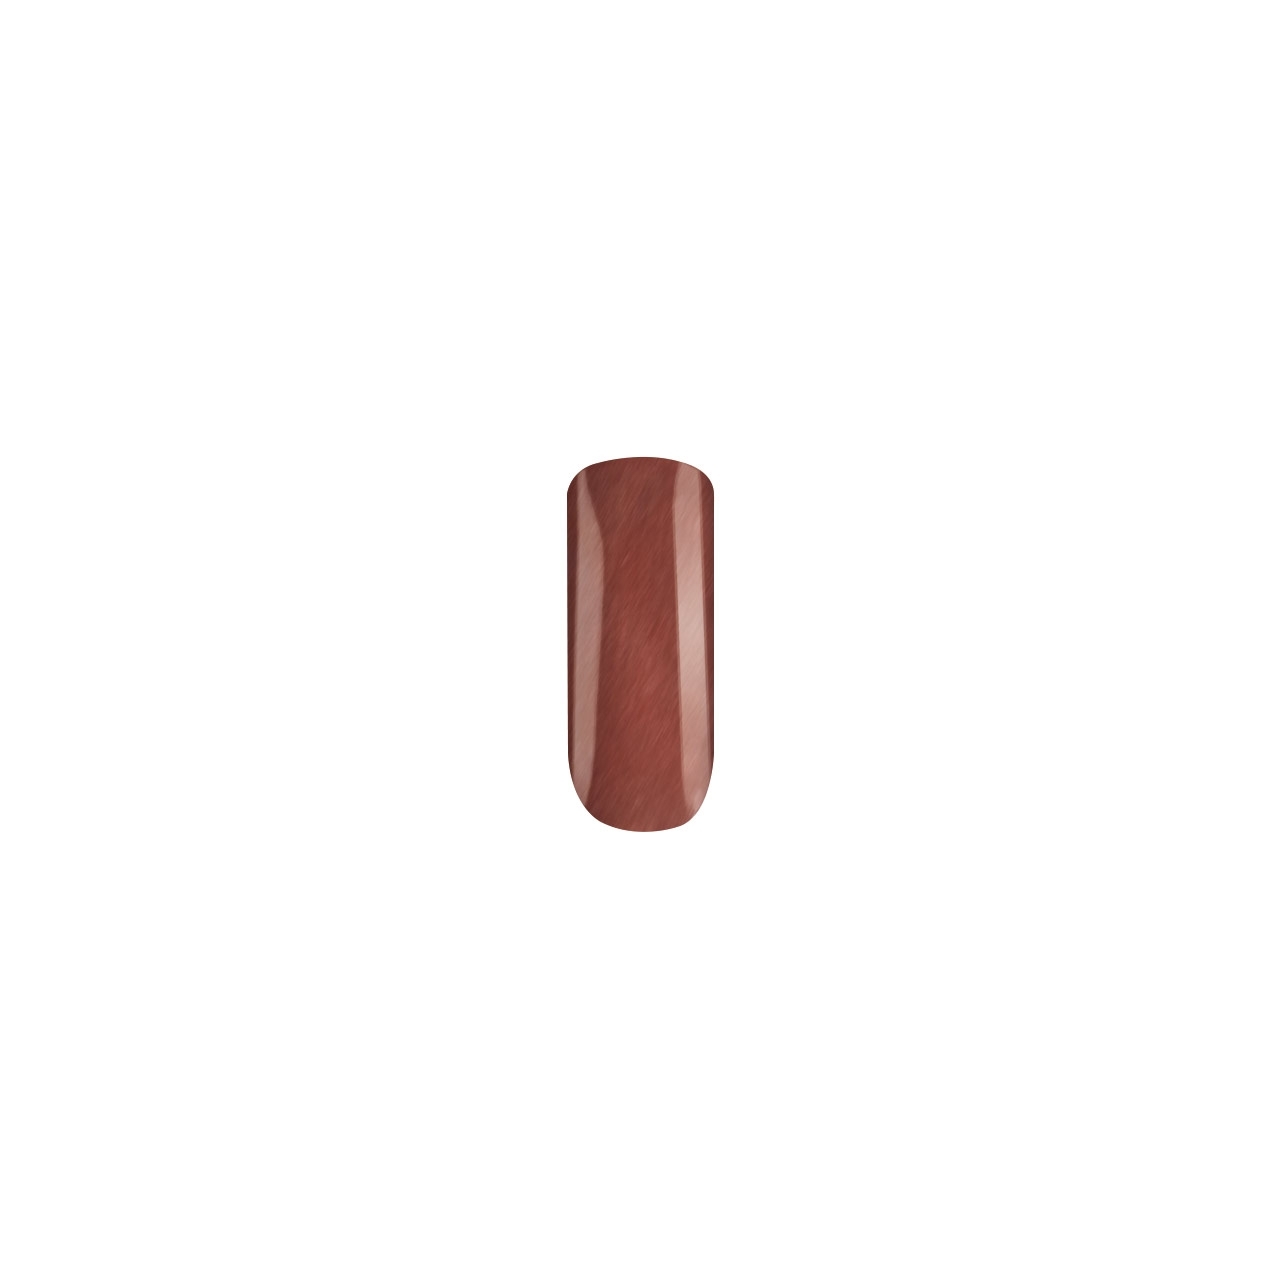 BAEHR BEAUTY CONCEPT - NAILS Nagellack chestnut pearl 11 ml